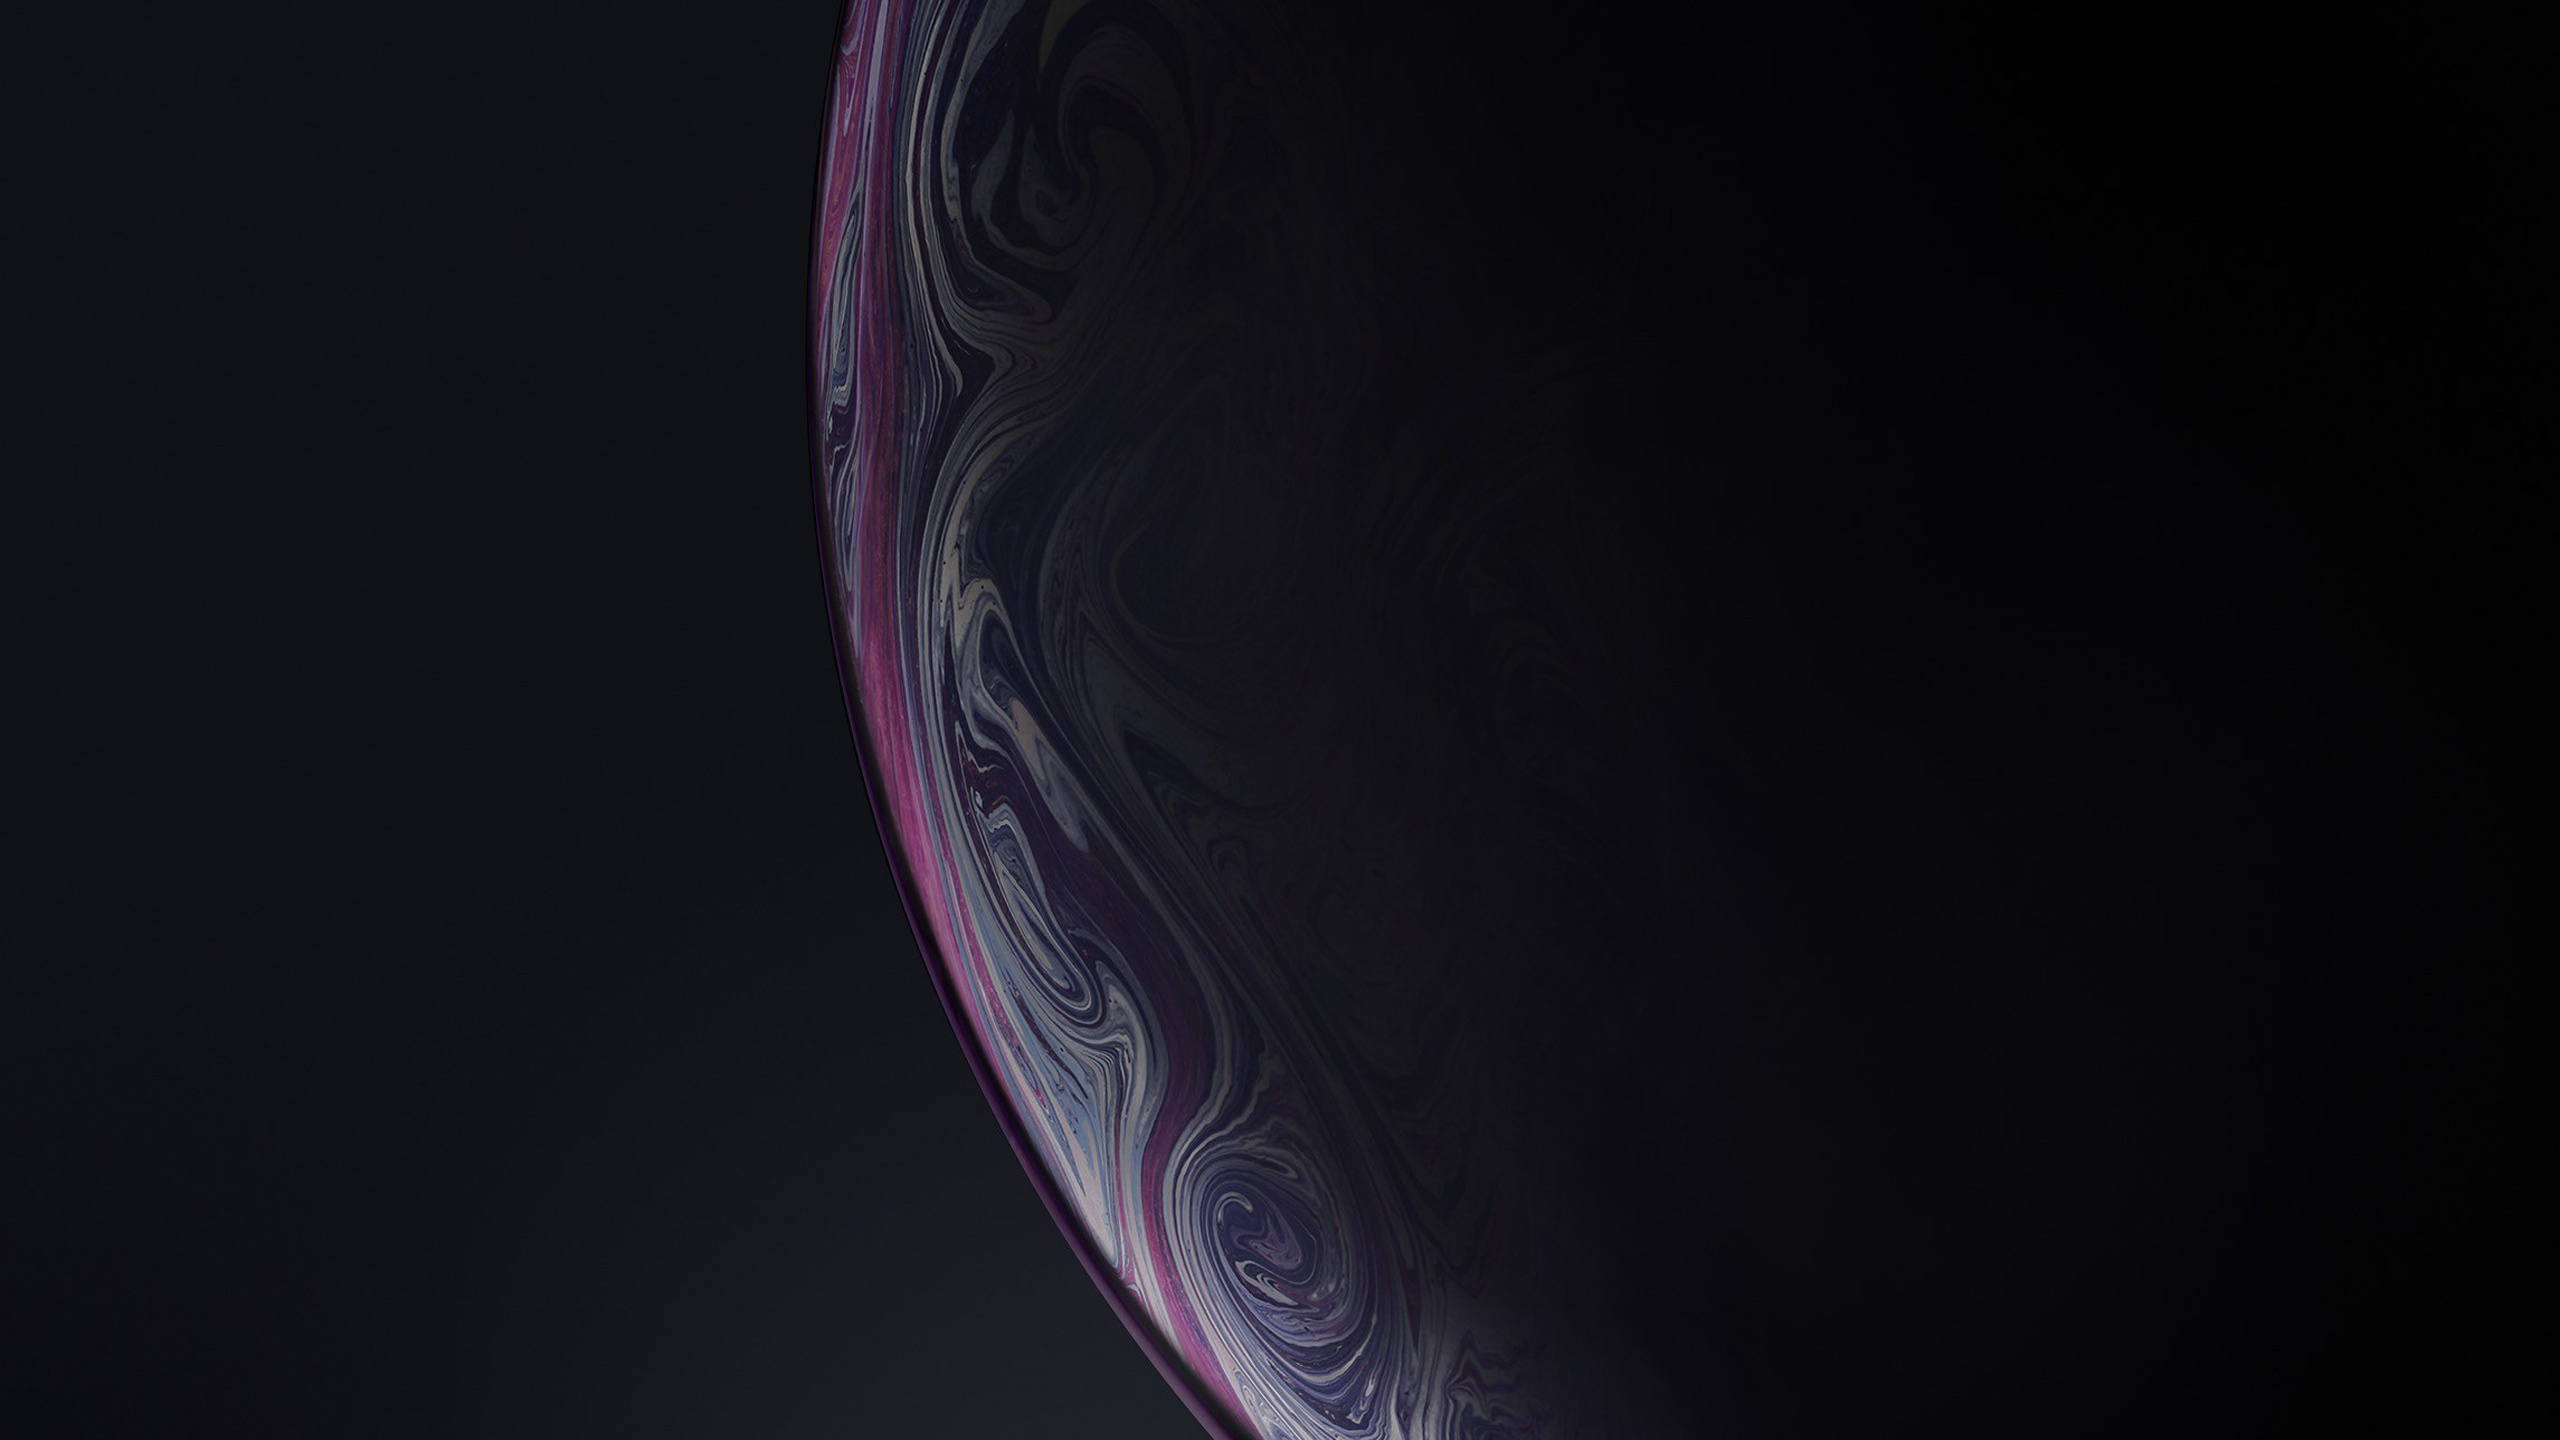 General 2560x1440 iOS space planet marble